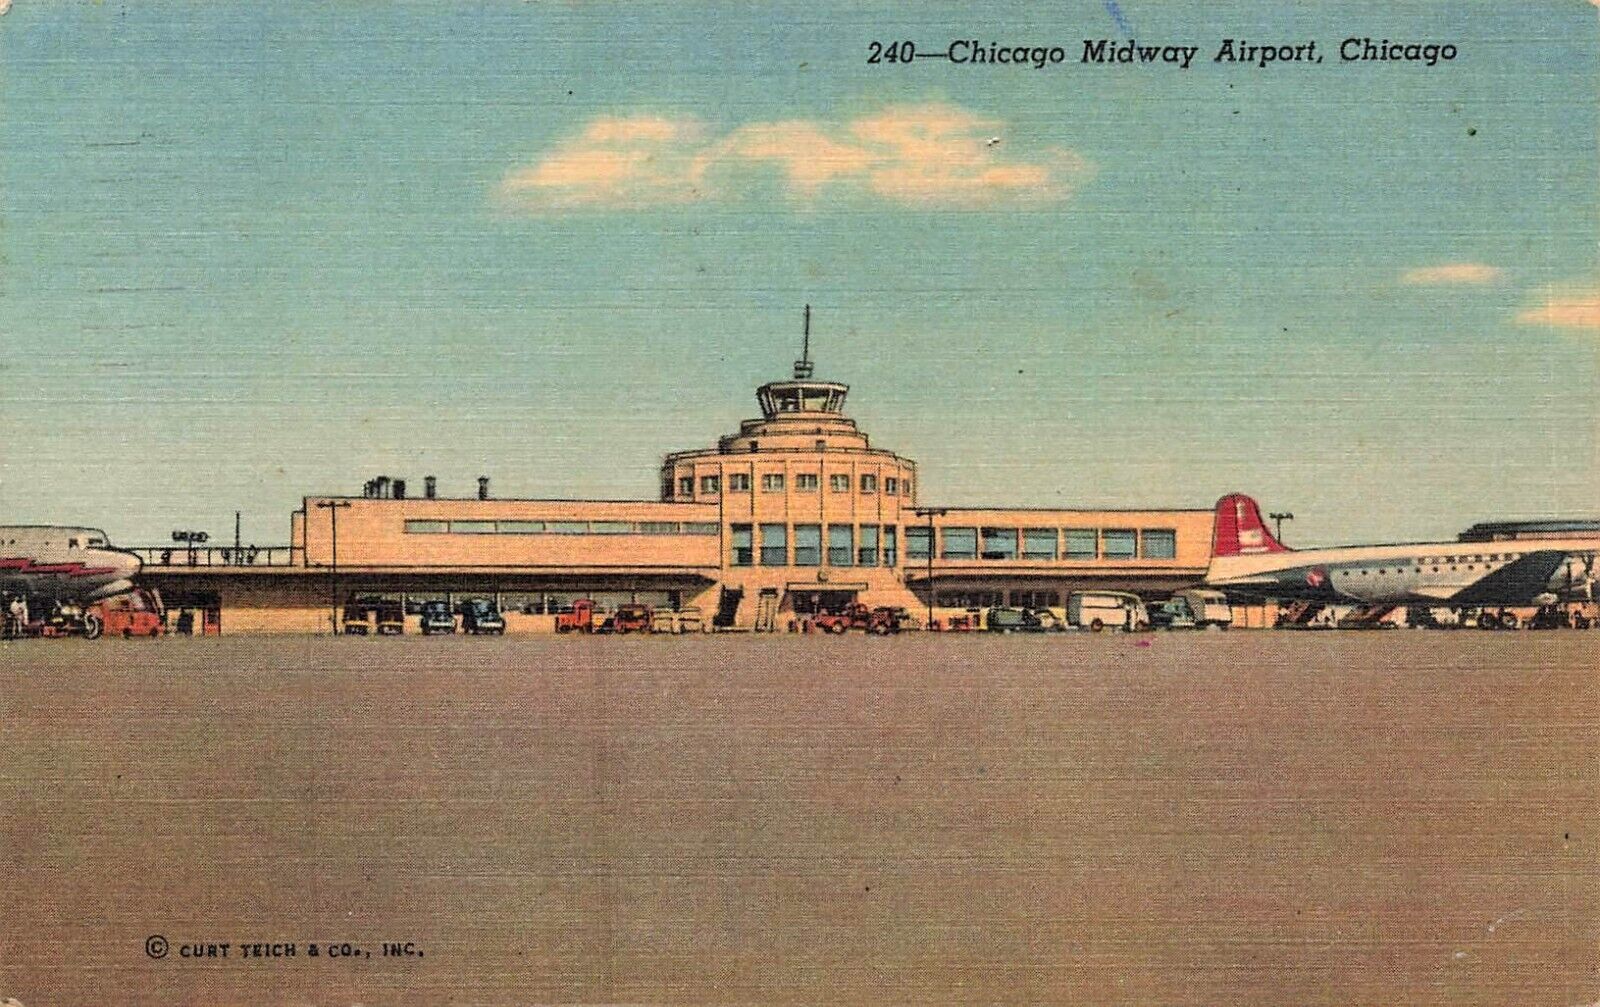 1952 ILLINOIS POSTCARD: VIEW OF CHICAGO MIDWAY AIRPORT, CHICAGO, IL